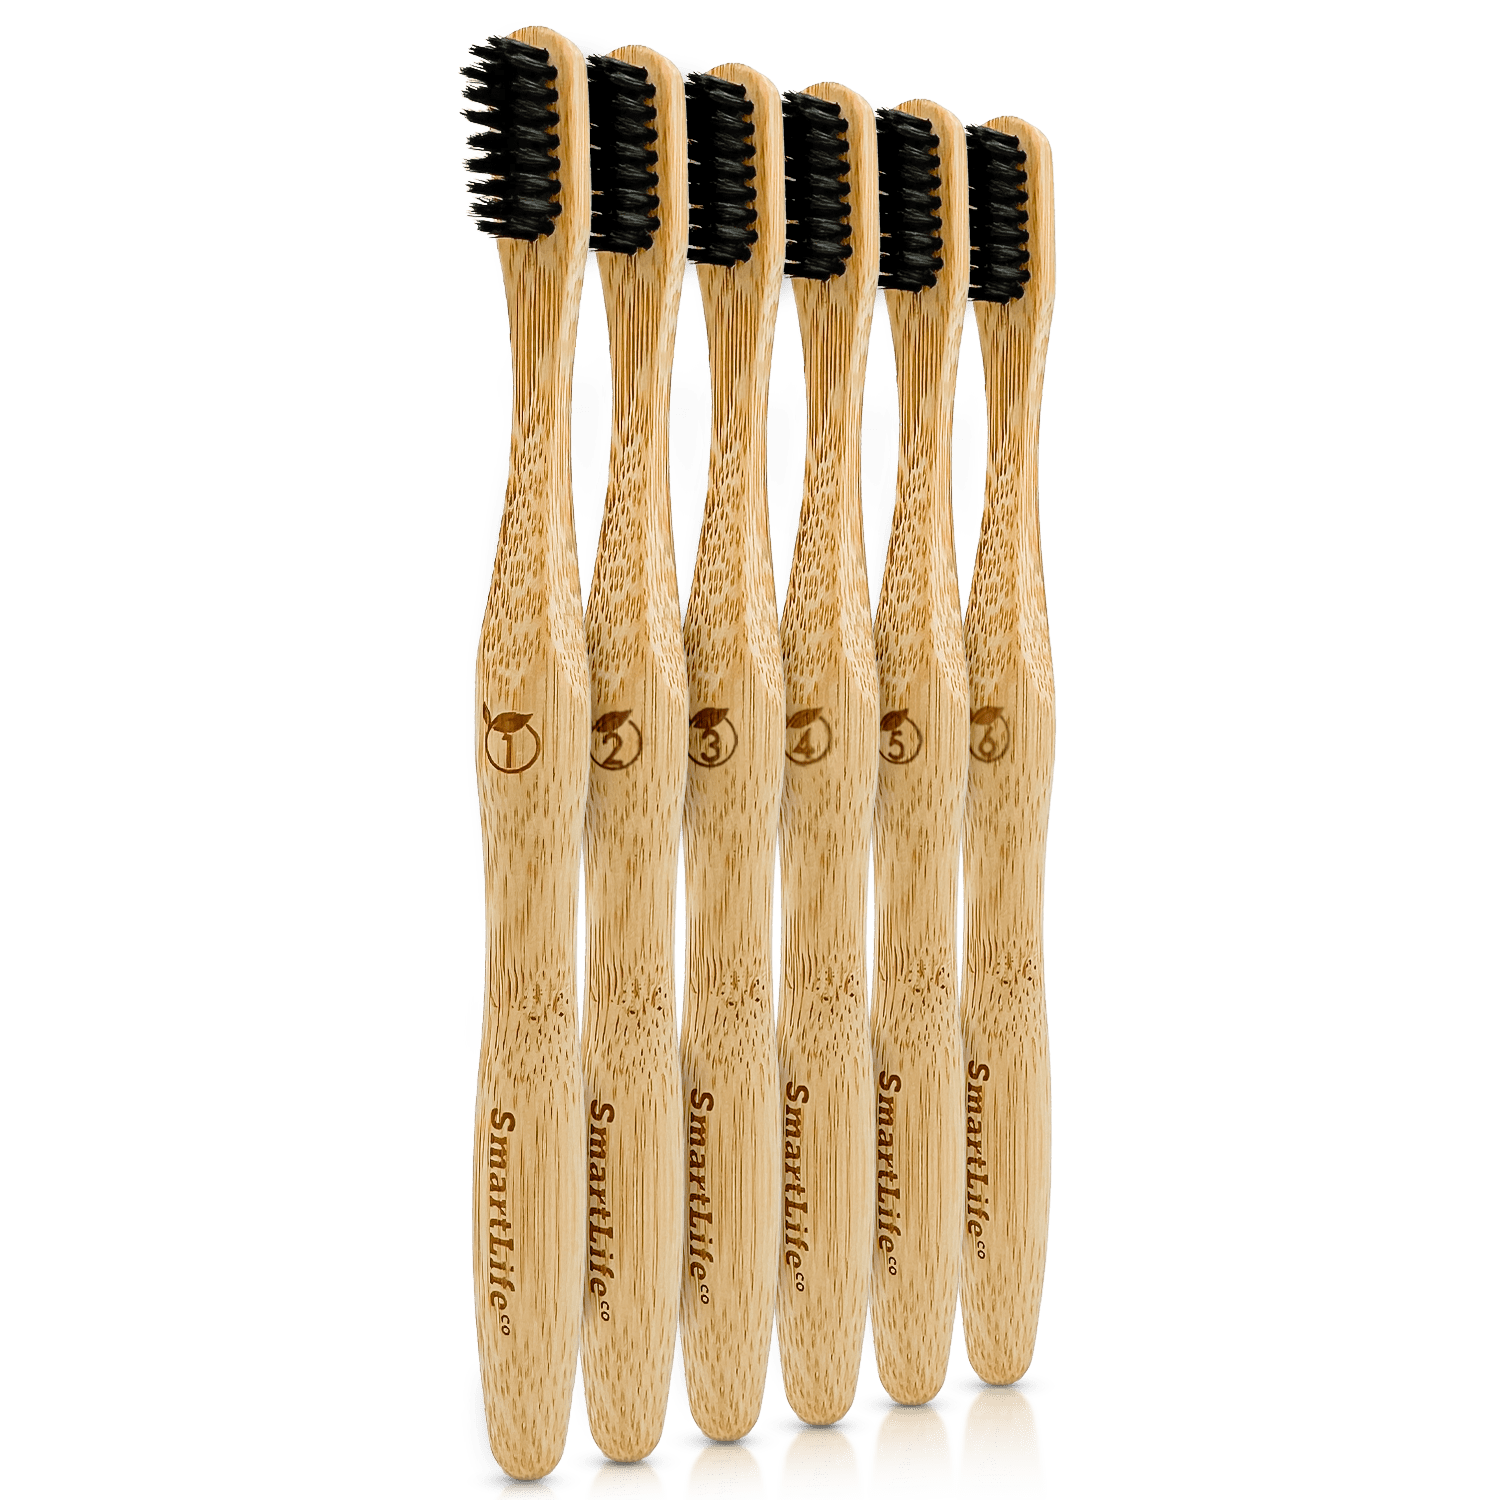 Charcoal Bamboo Toothbrush PRO